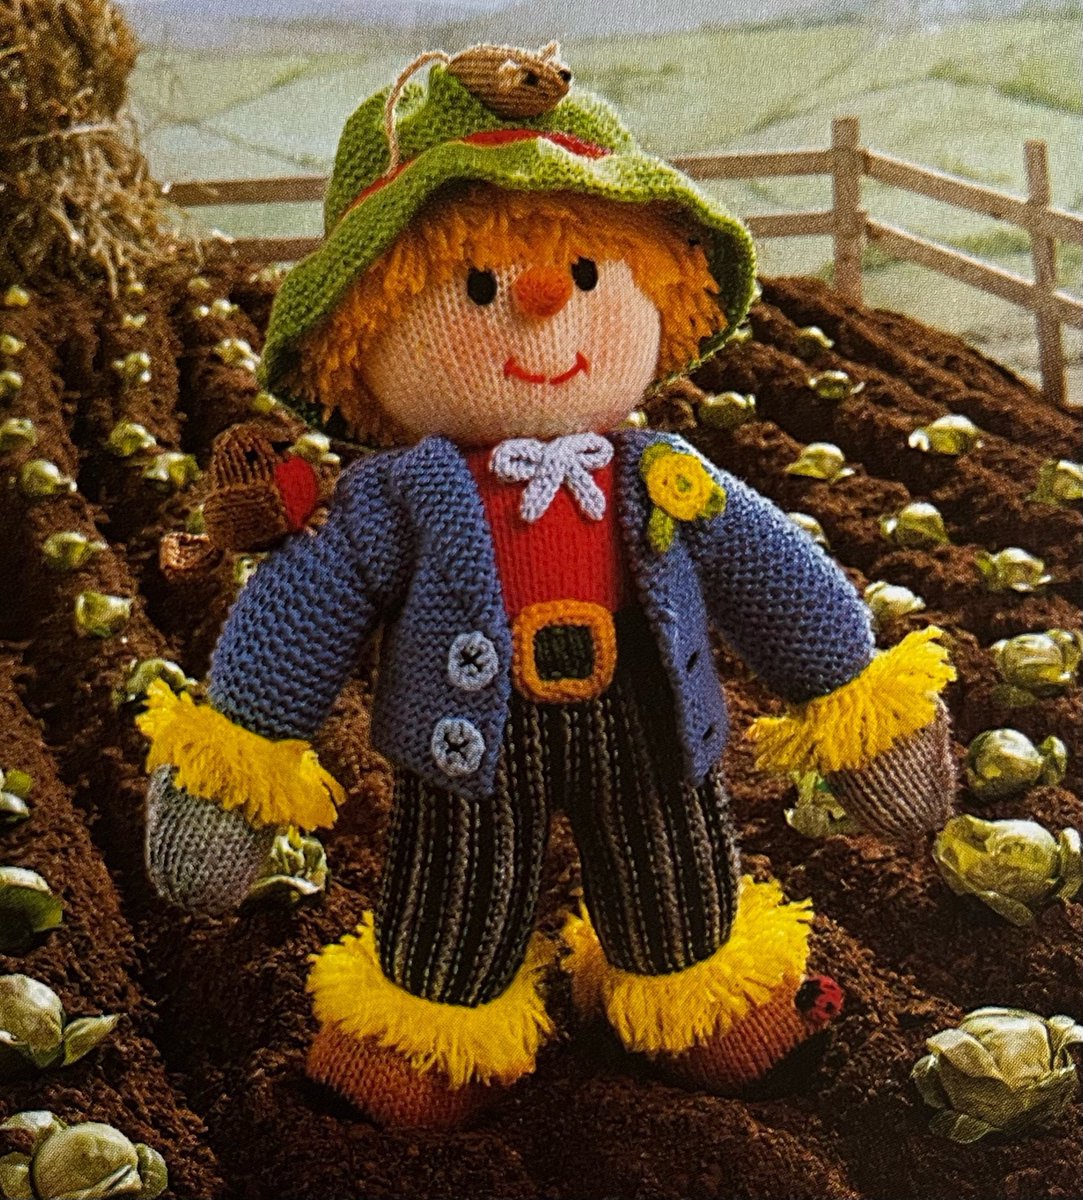 Vintage Knitted Toy Scarecrow Pattern etsy.me/3IJd8pk #sewing #knittedscarecrow #scarecrow #robin #ladybird #mouse #knitteddoll #knittedtoy #knits #MHHSBD #ElevensesHour #CraftBizParty #Wip